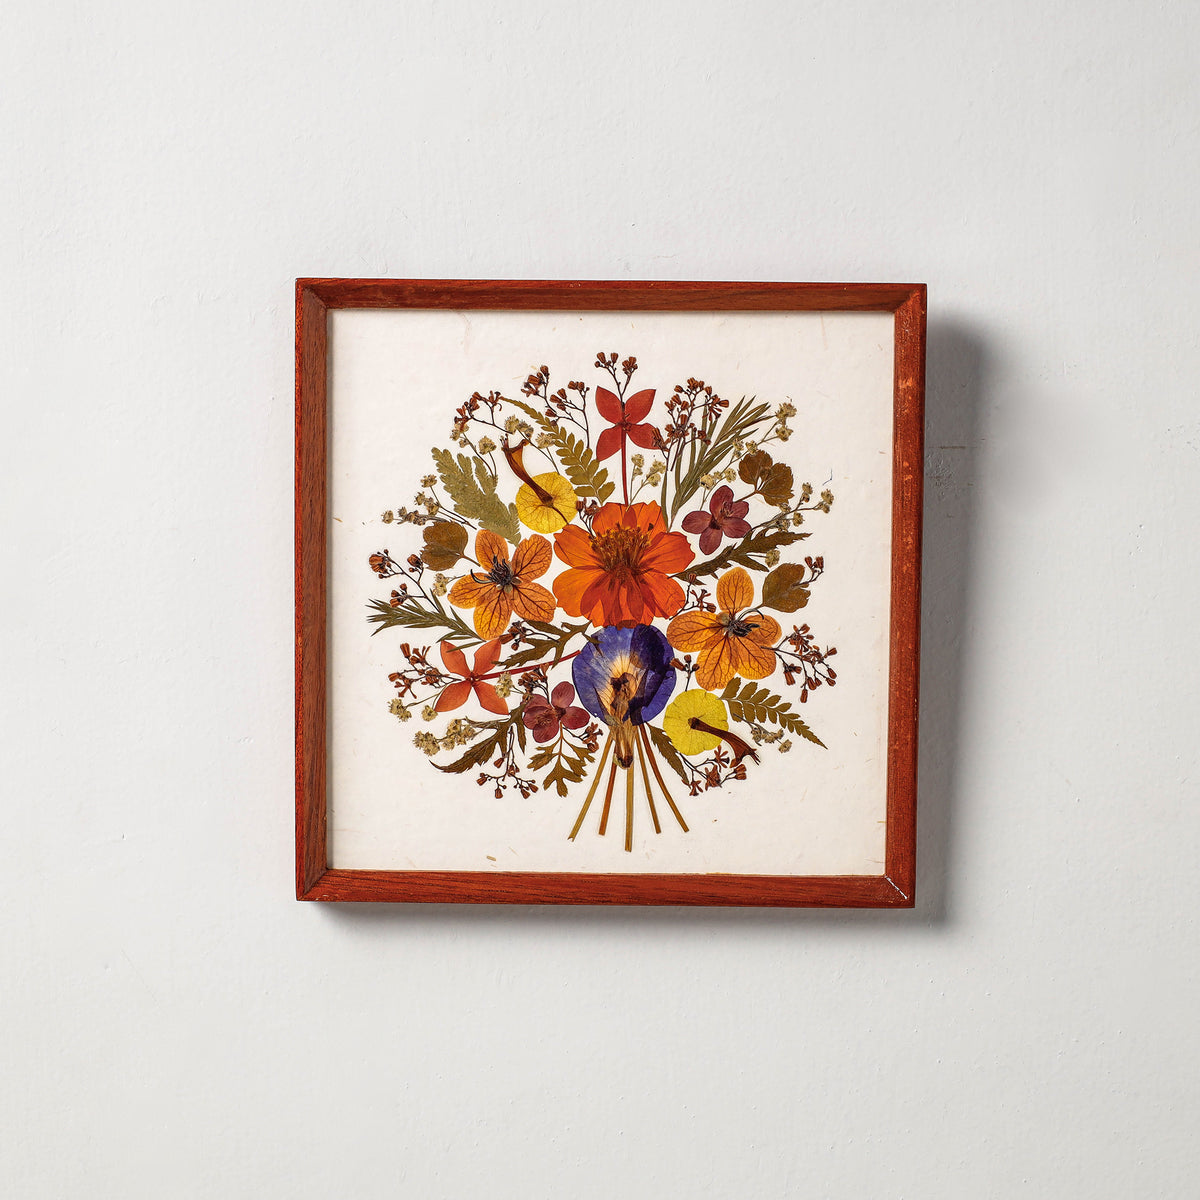 Classic Natural Flower Art Work Wall Hanging Wooden Frame (8 x 8 in)